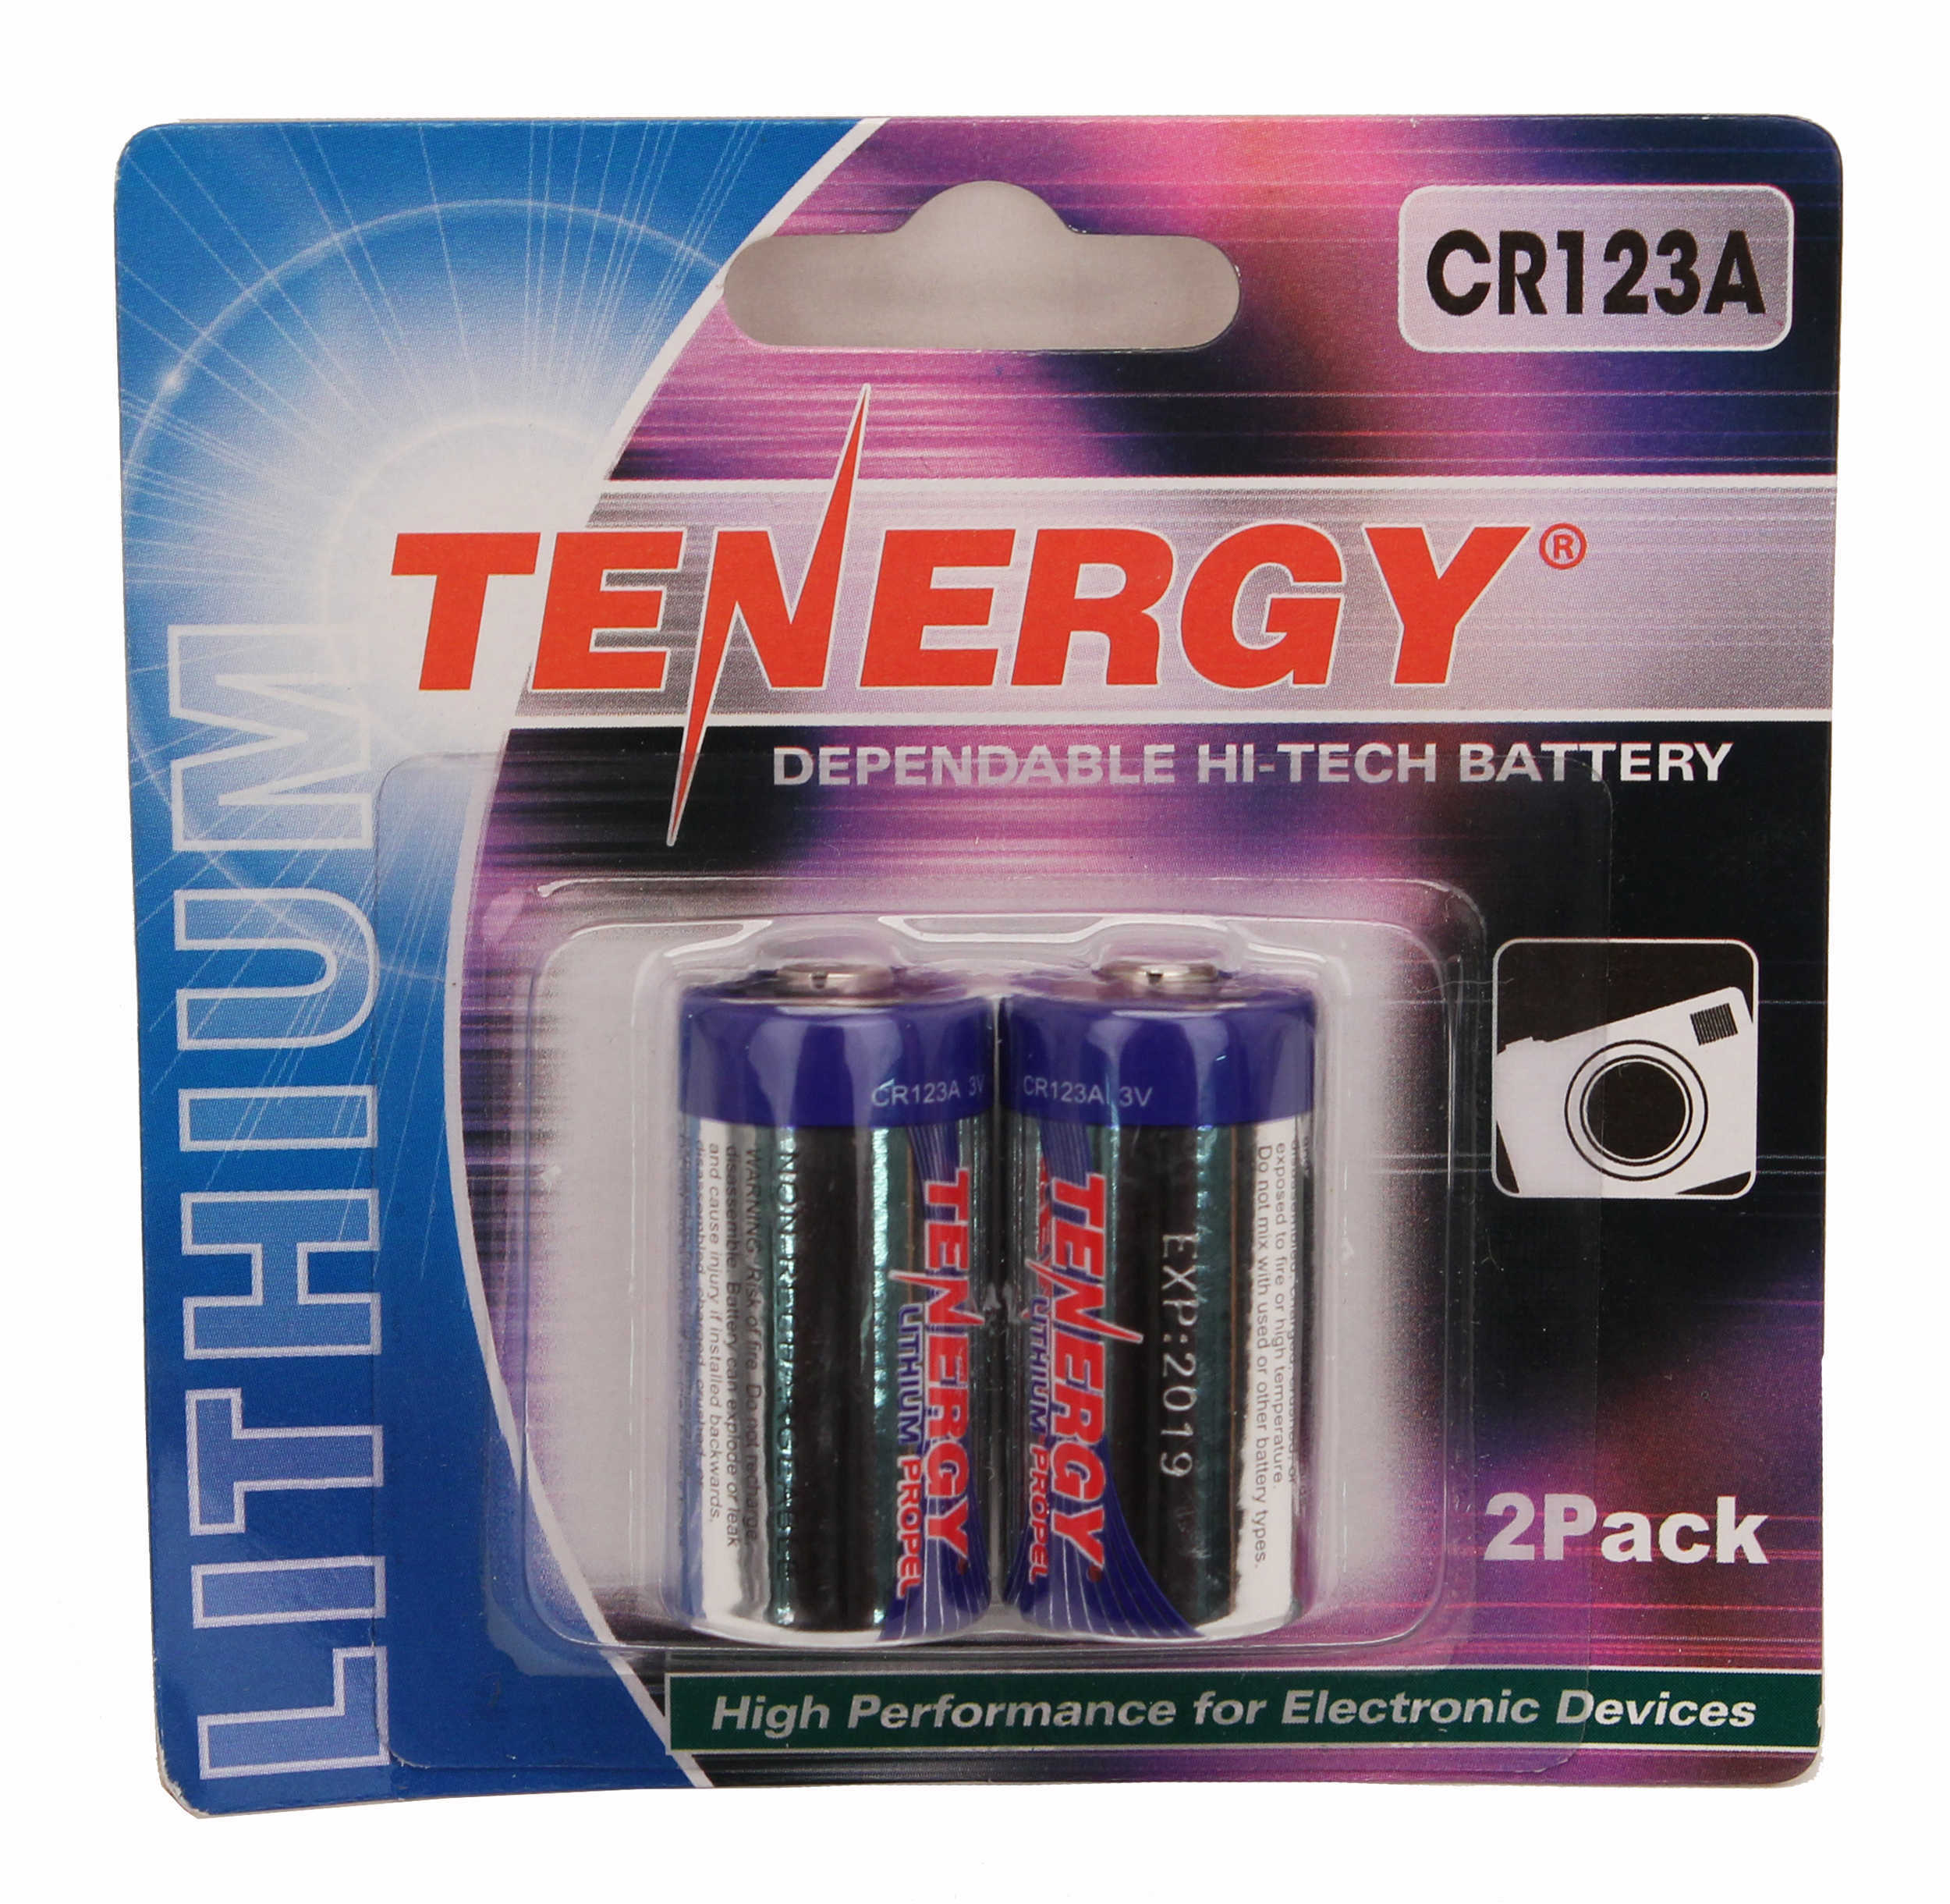 Tenergy Non-Rechargeable CR123A 3V Batteries, 2-Pack Md: 30407